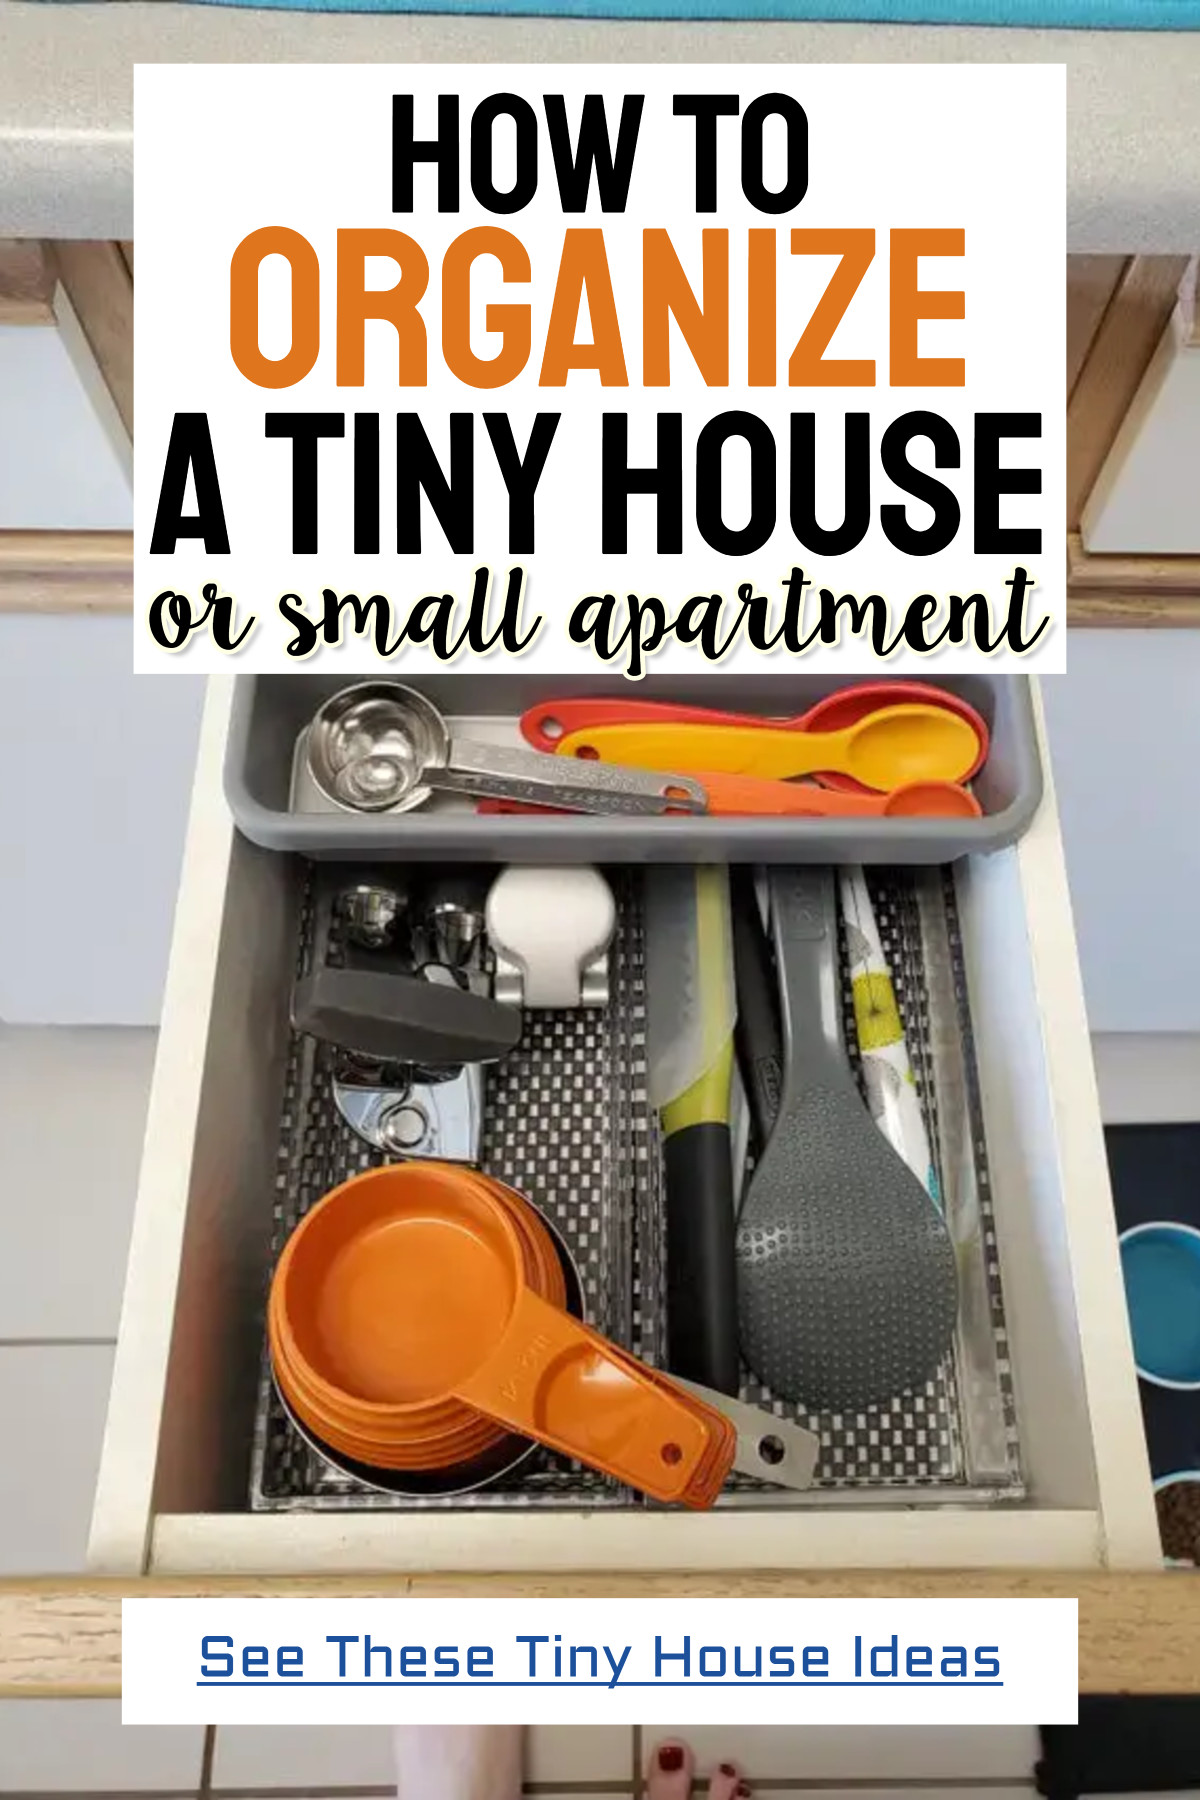 Downsizing your home? How to organize a tiny house or small apartment